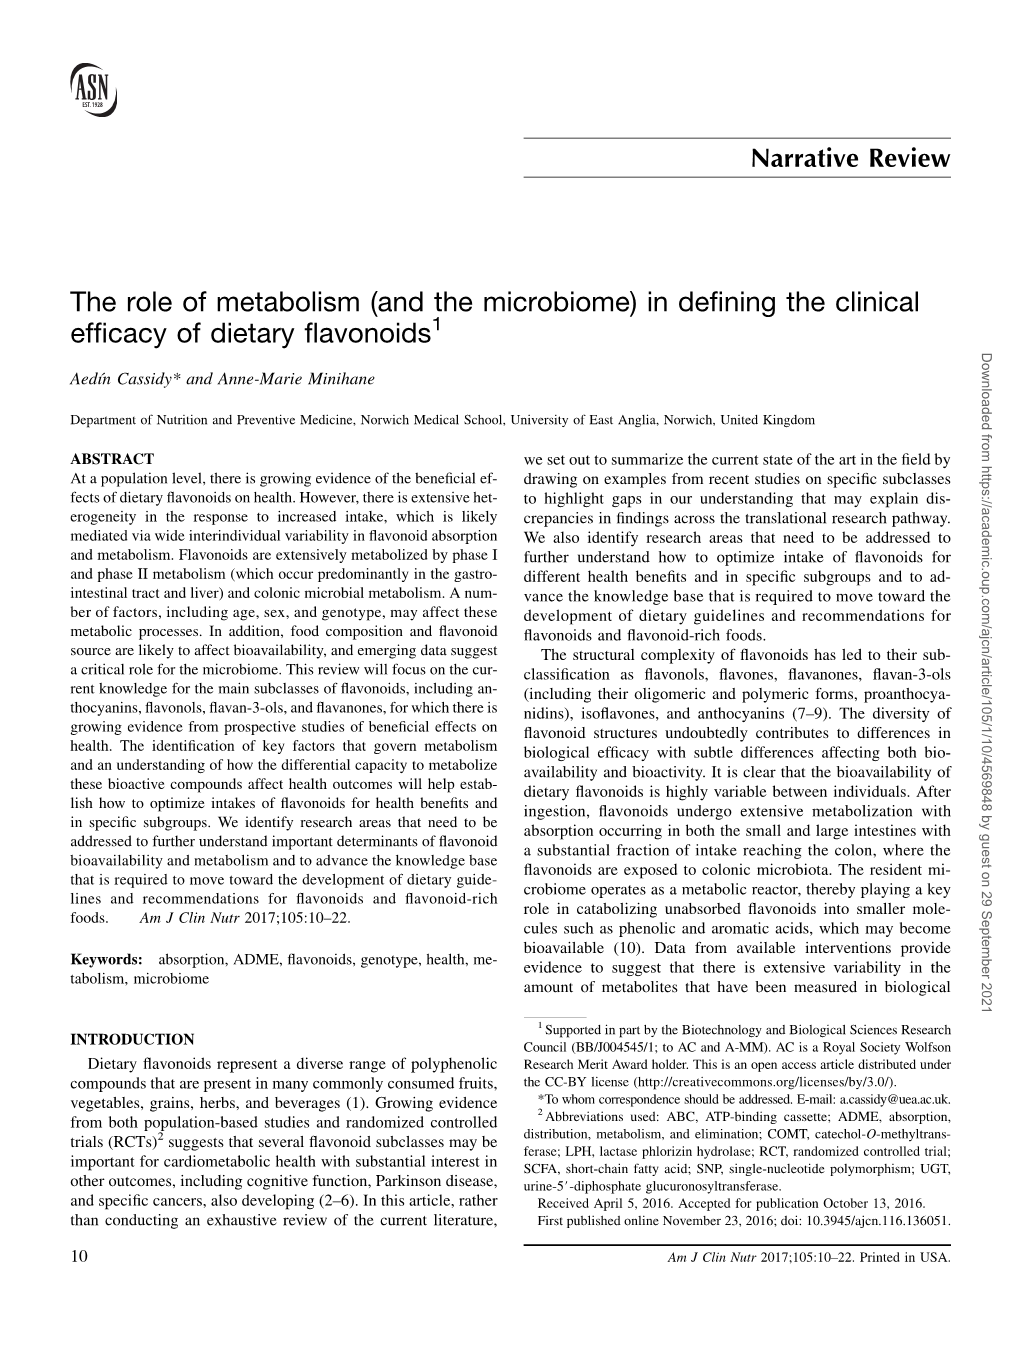 In Defining the Clinical Efficacy of Dietary Flavonoids